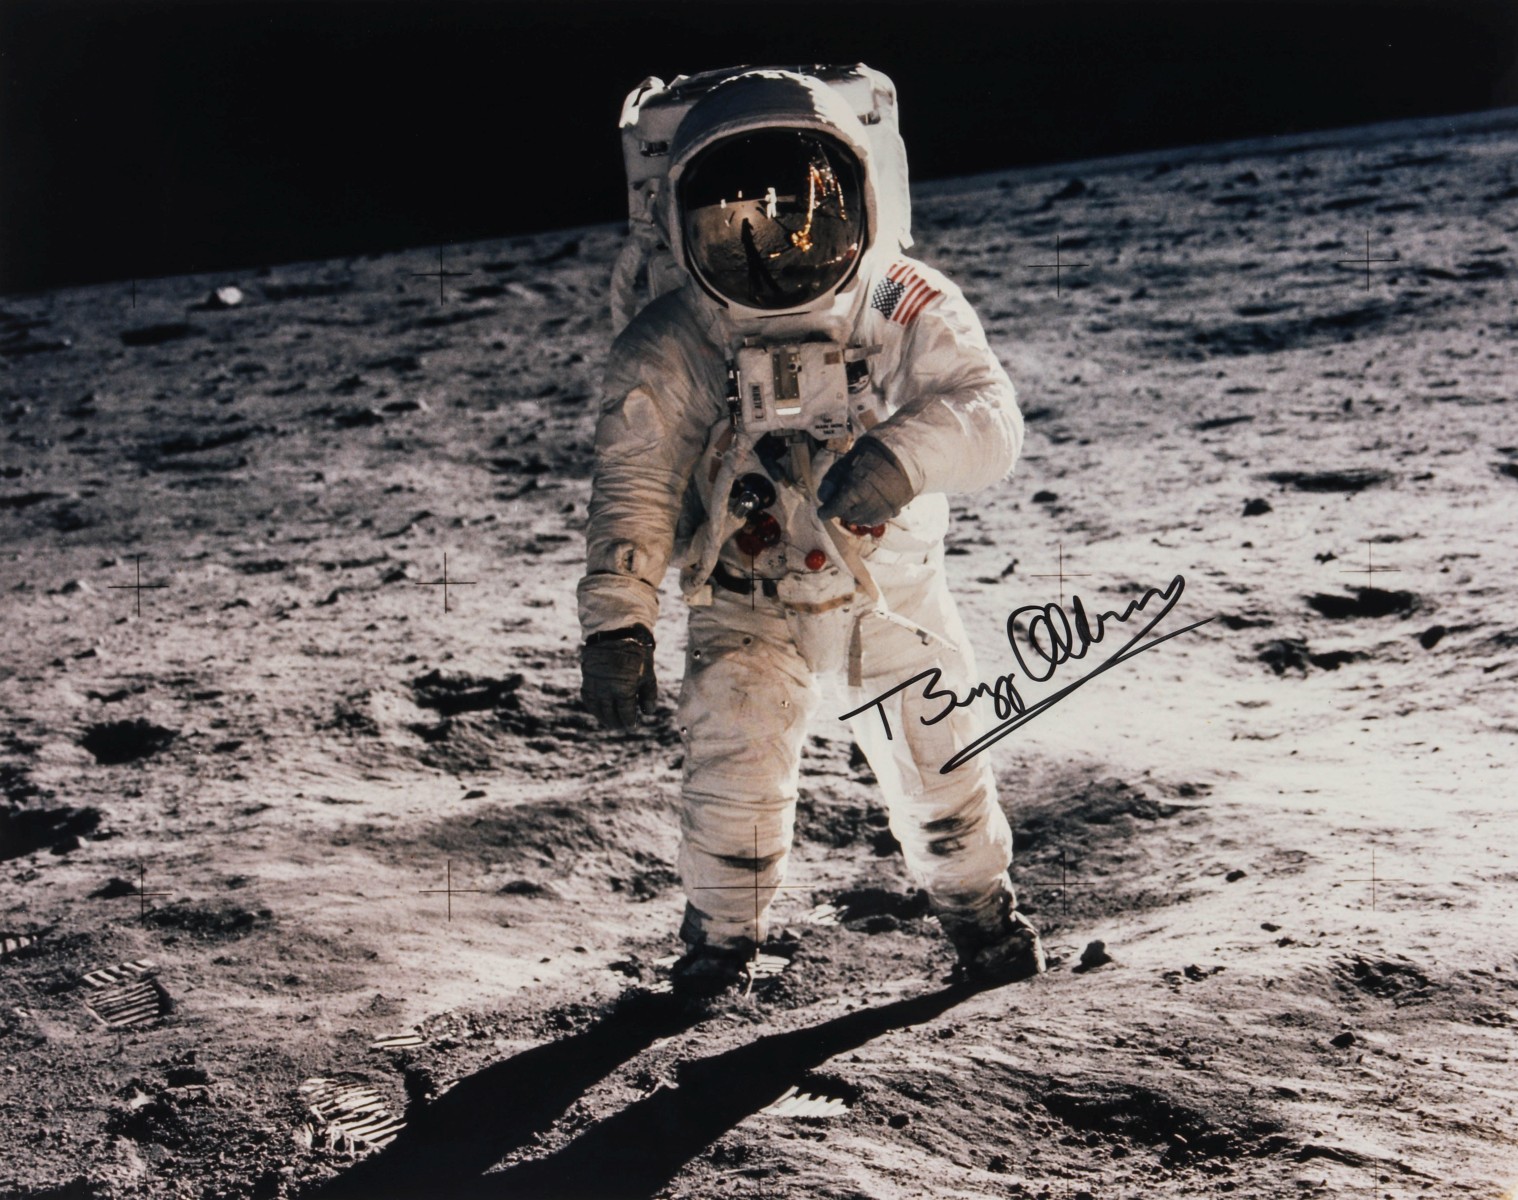 AN ICONIC BUZZ ALDRIN SIGNED MOON LANDING PHOTOGRAPH